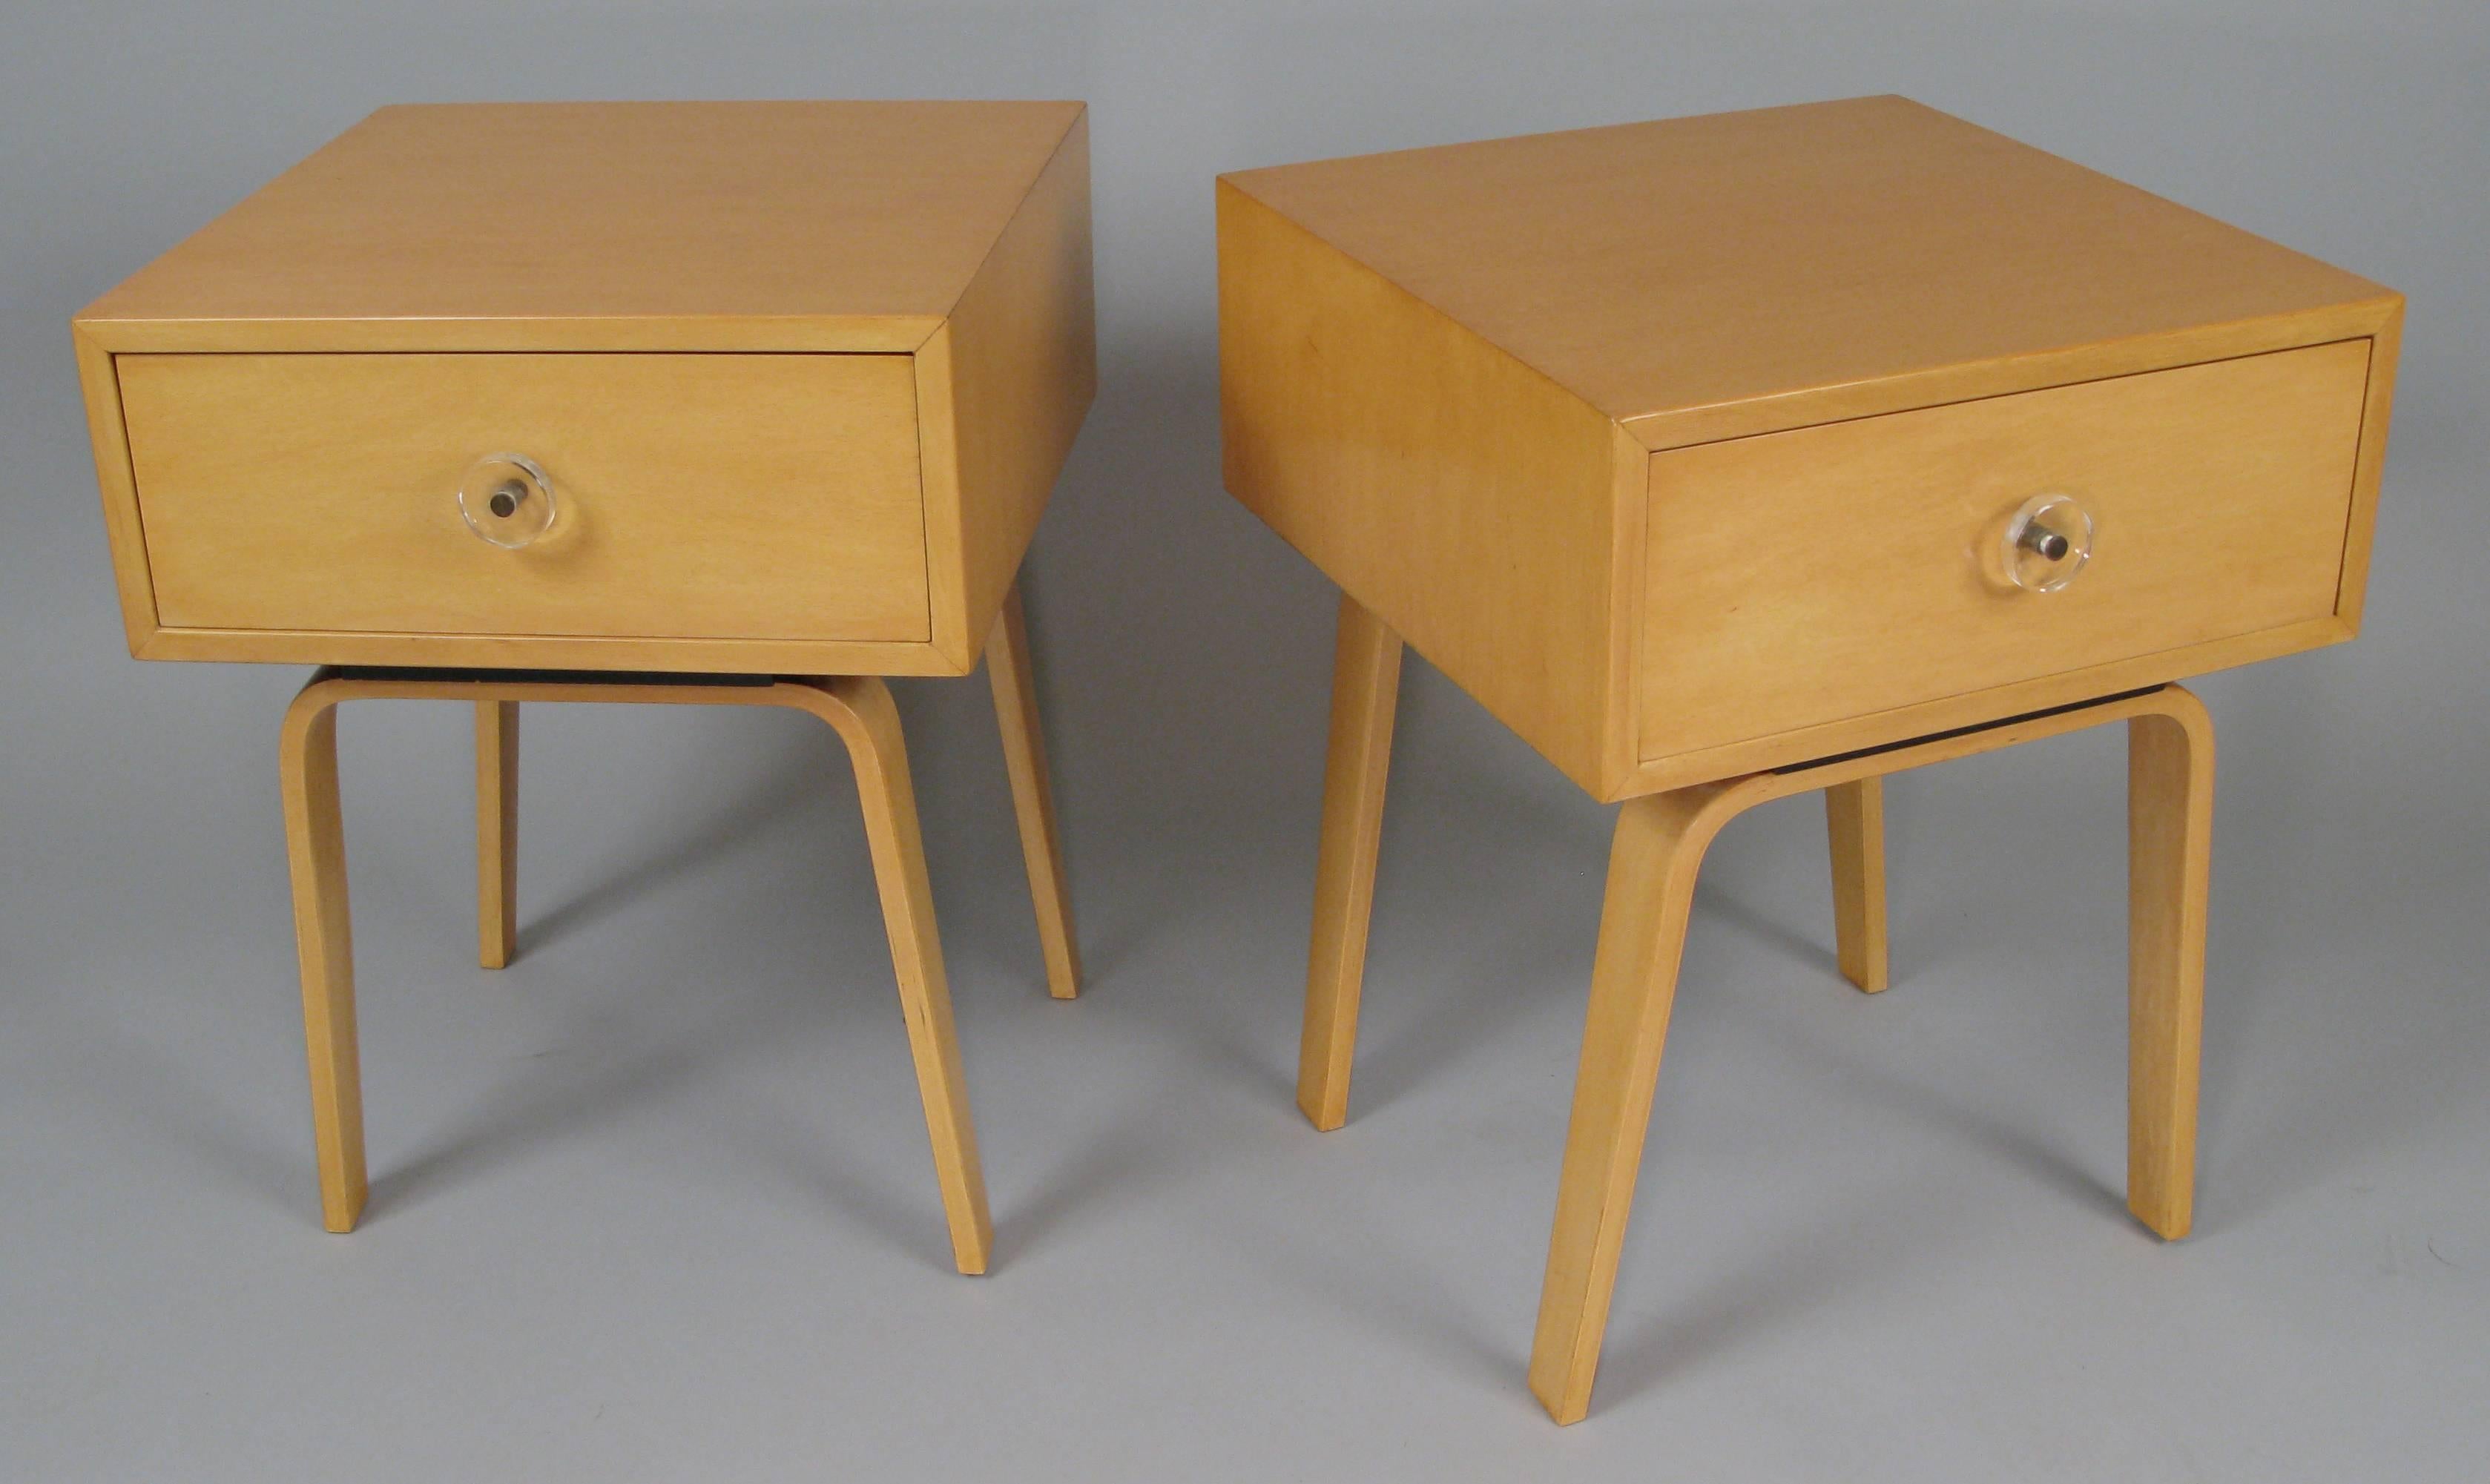 A very nice pair of vintage 1950s single-drawer nightstands with bentwood legs and Lucite drawer pulls. Handsome design and beautiful restored lacquer finish.